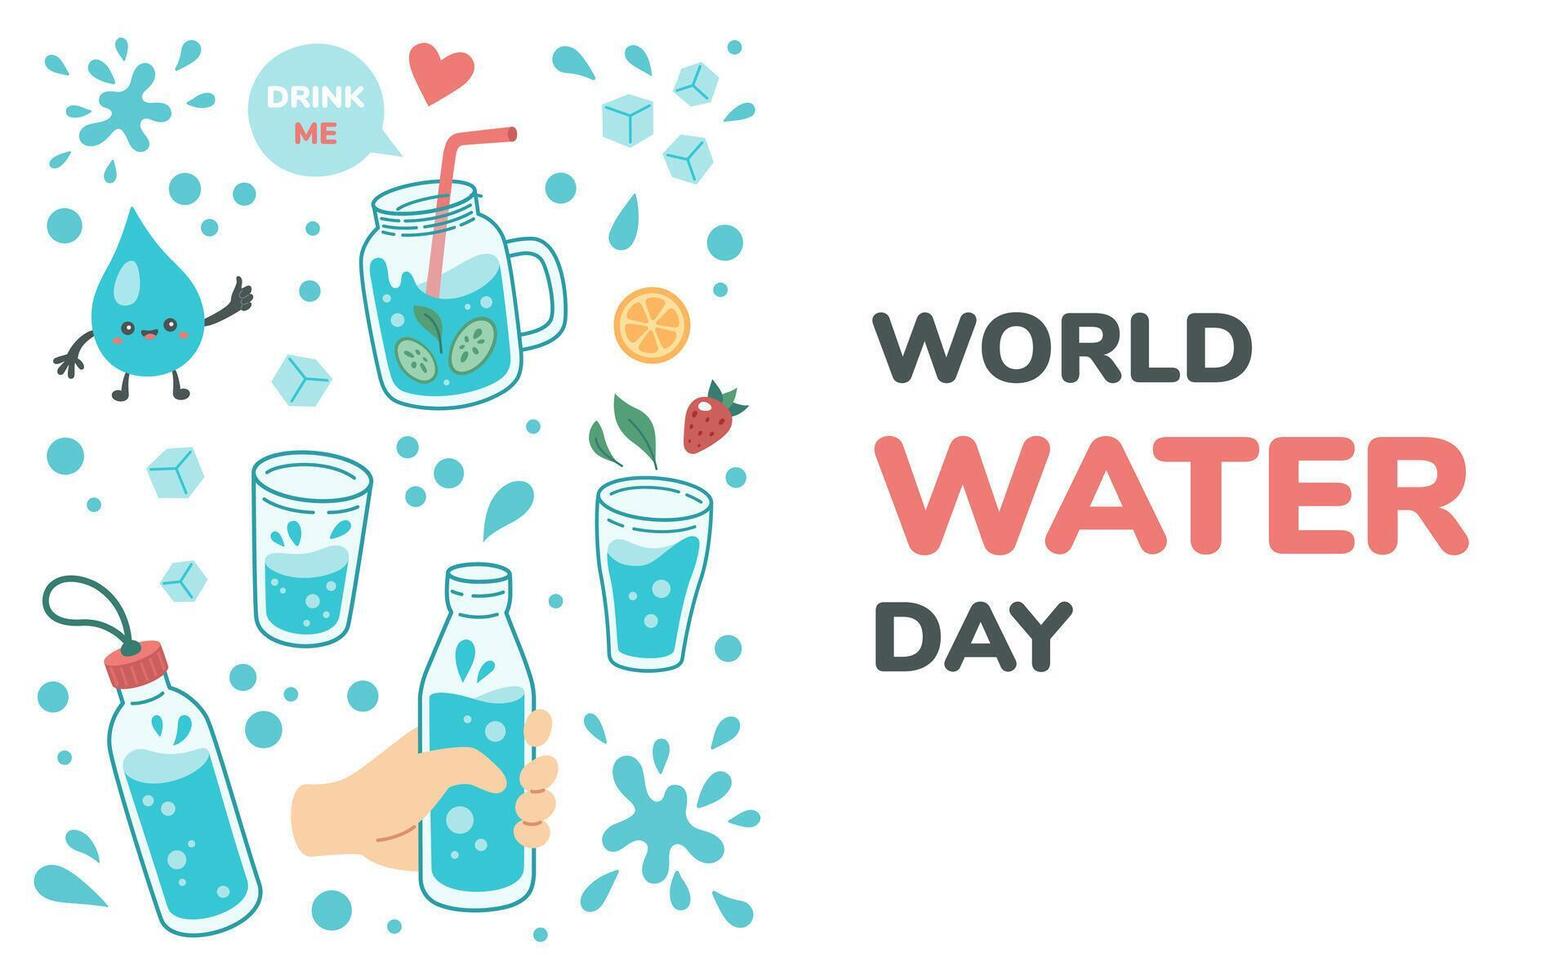 World water Day banner, postcard with water in glass, jar, glass bottle and text. Hand drawn Vector illustration for international holiday. Cartoon style, flat design. Drink more water concept.